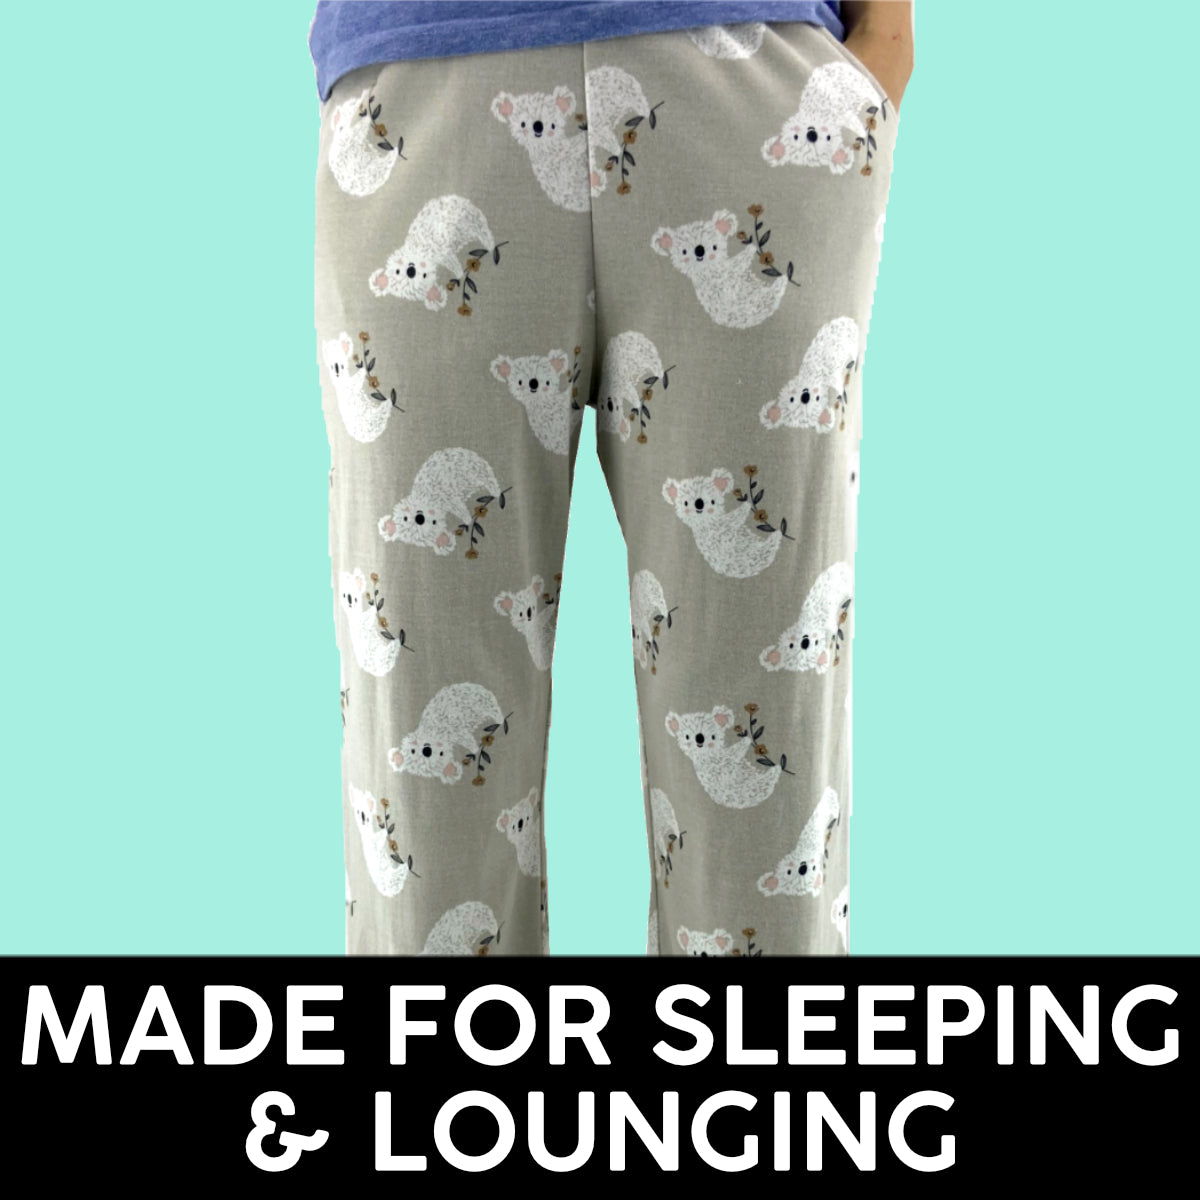 100% Cotton Pajama Pants. With a drawstring elastic waistband, these bottoms are made to fit you perfectly; not too short and not too tight.